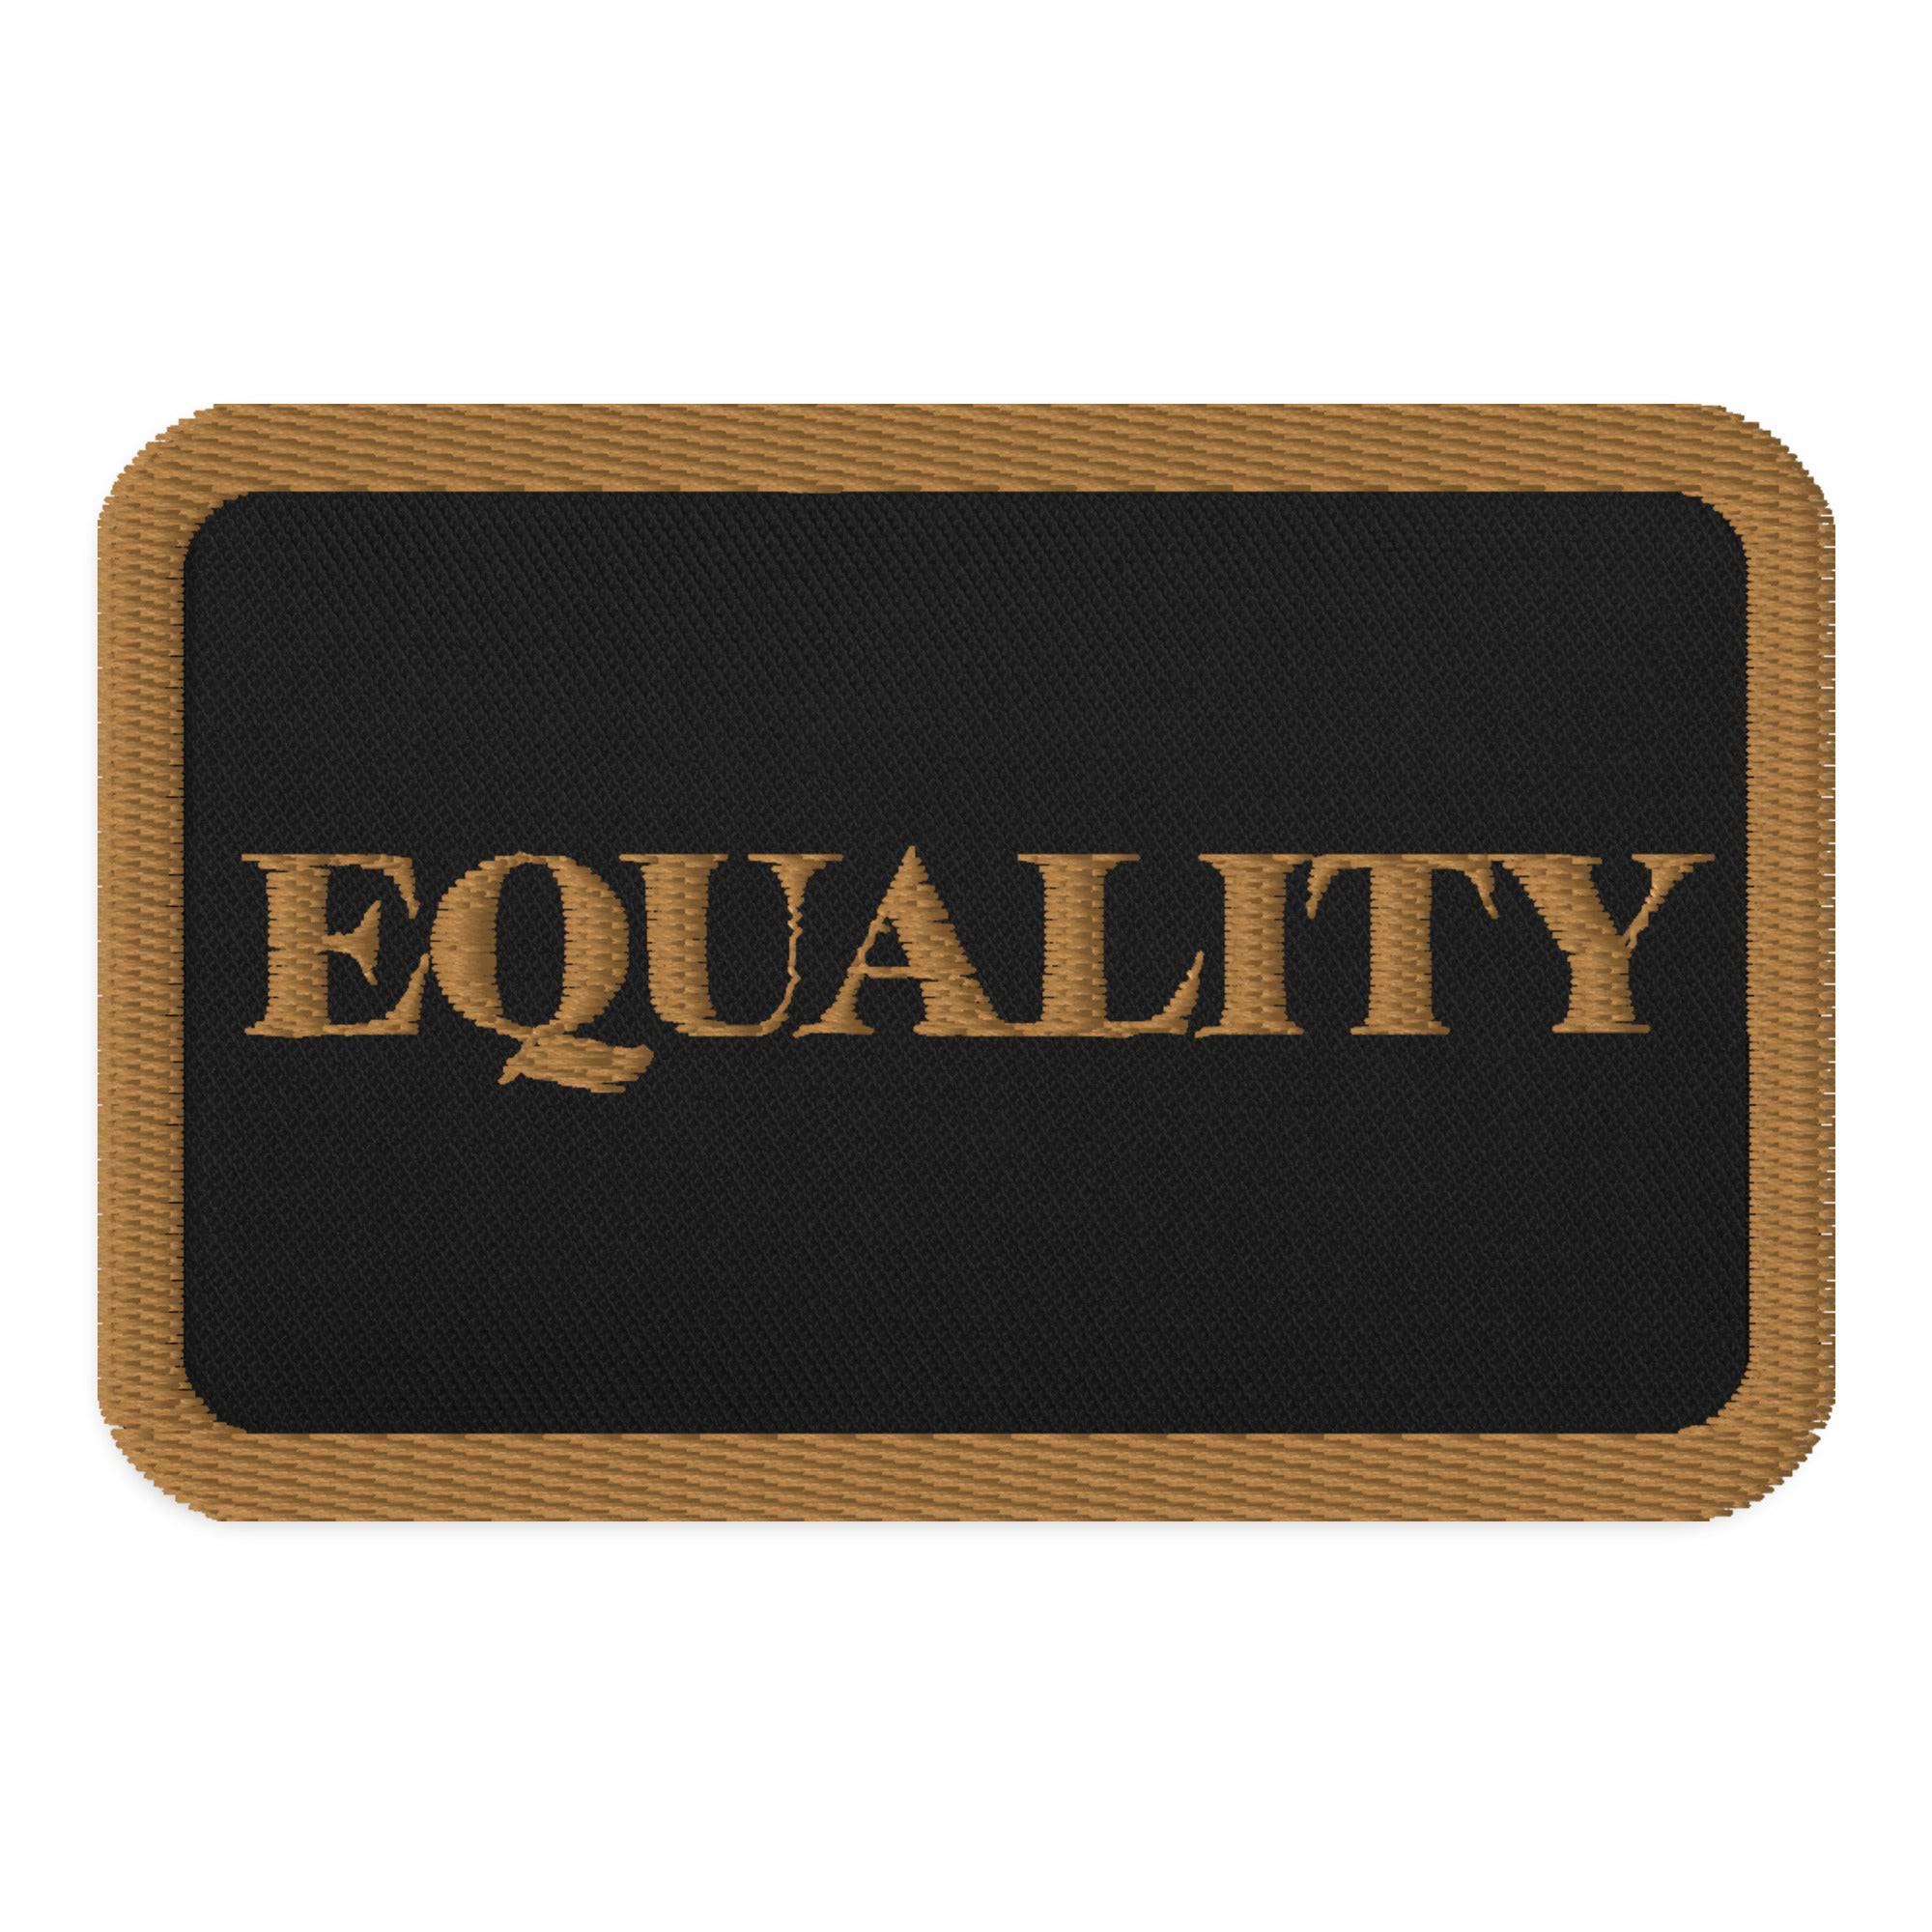 Equality Patch Embroidered patches - Rose Gold Co. Shop